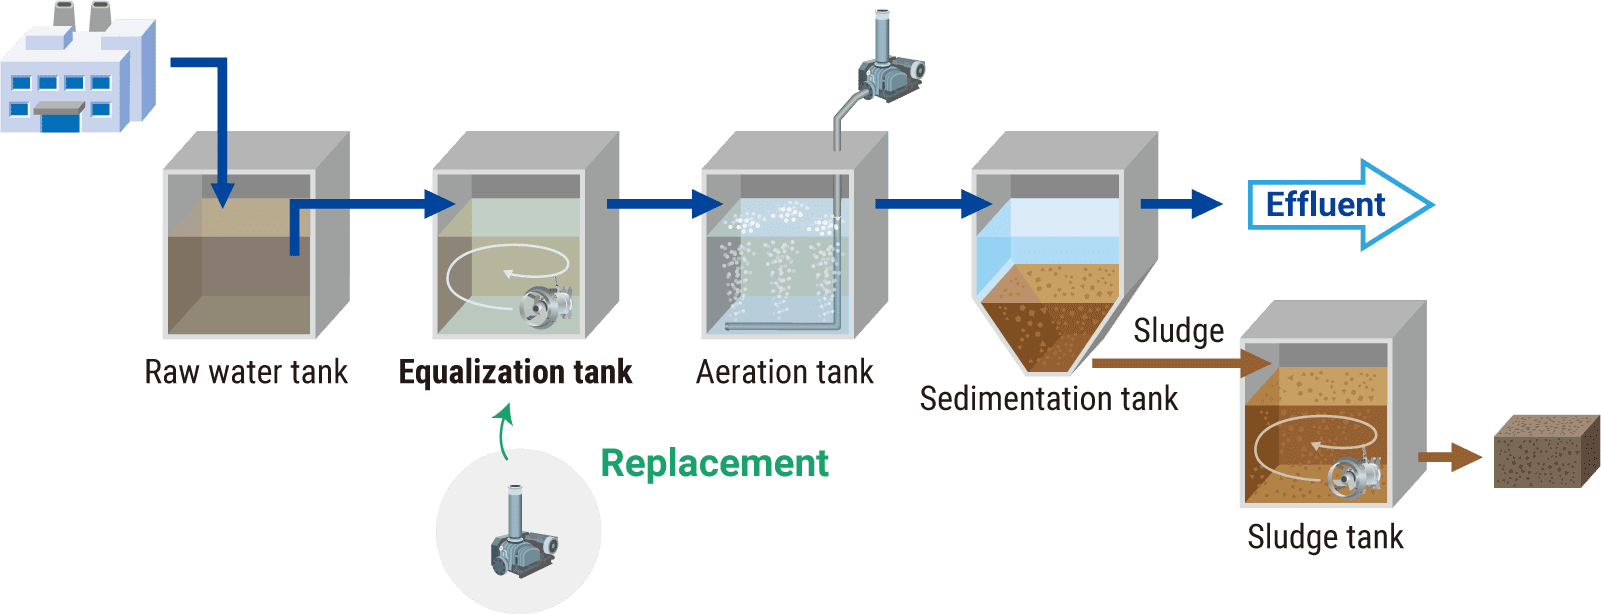 Illustration: Energy Saving Proposal by Changing from Blowers to Mixers for Equalization Tank Agitation